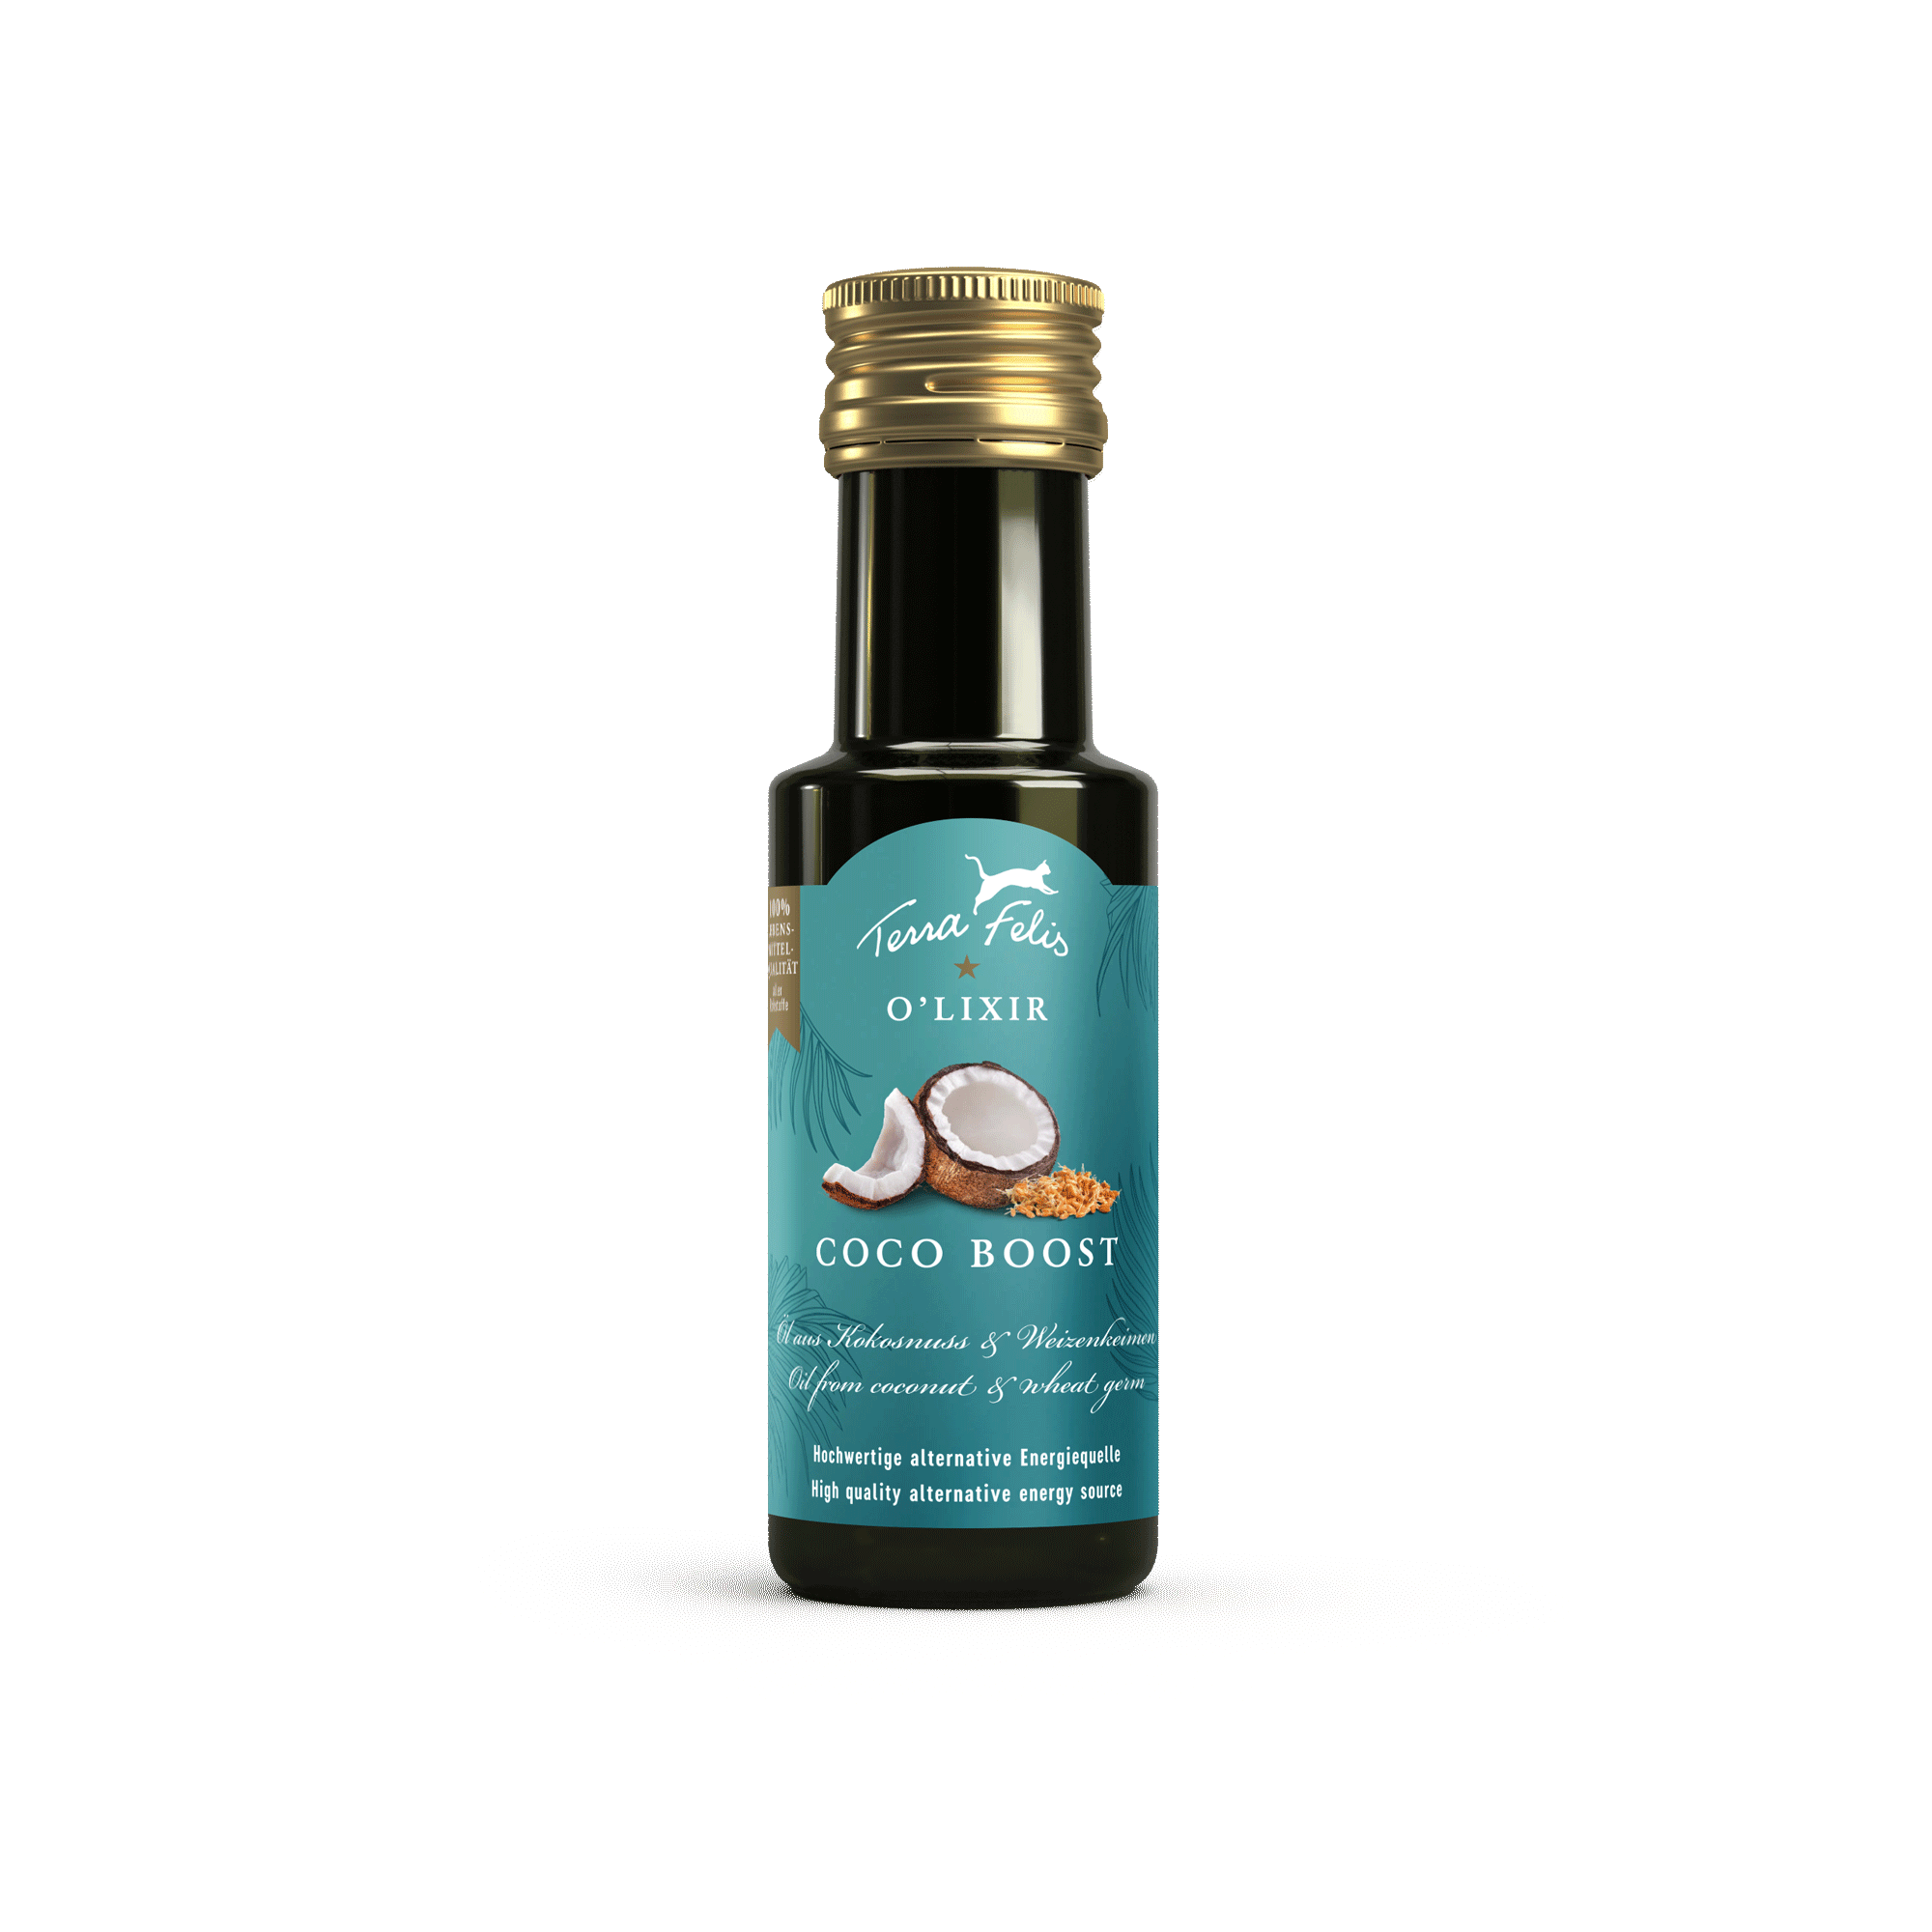 Coco Boost - coconut and wheat germ oil